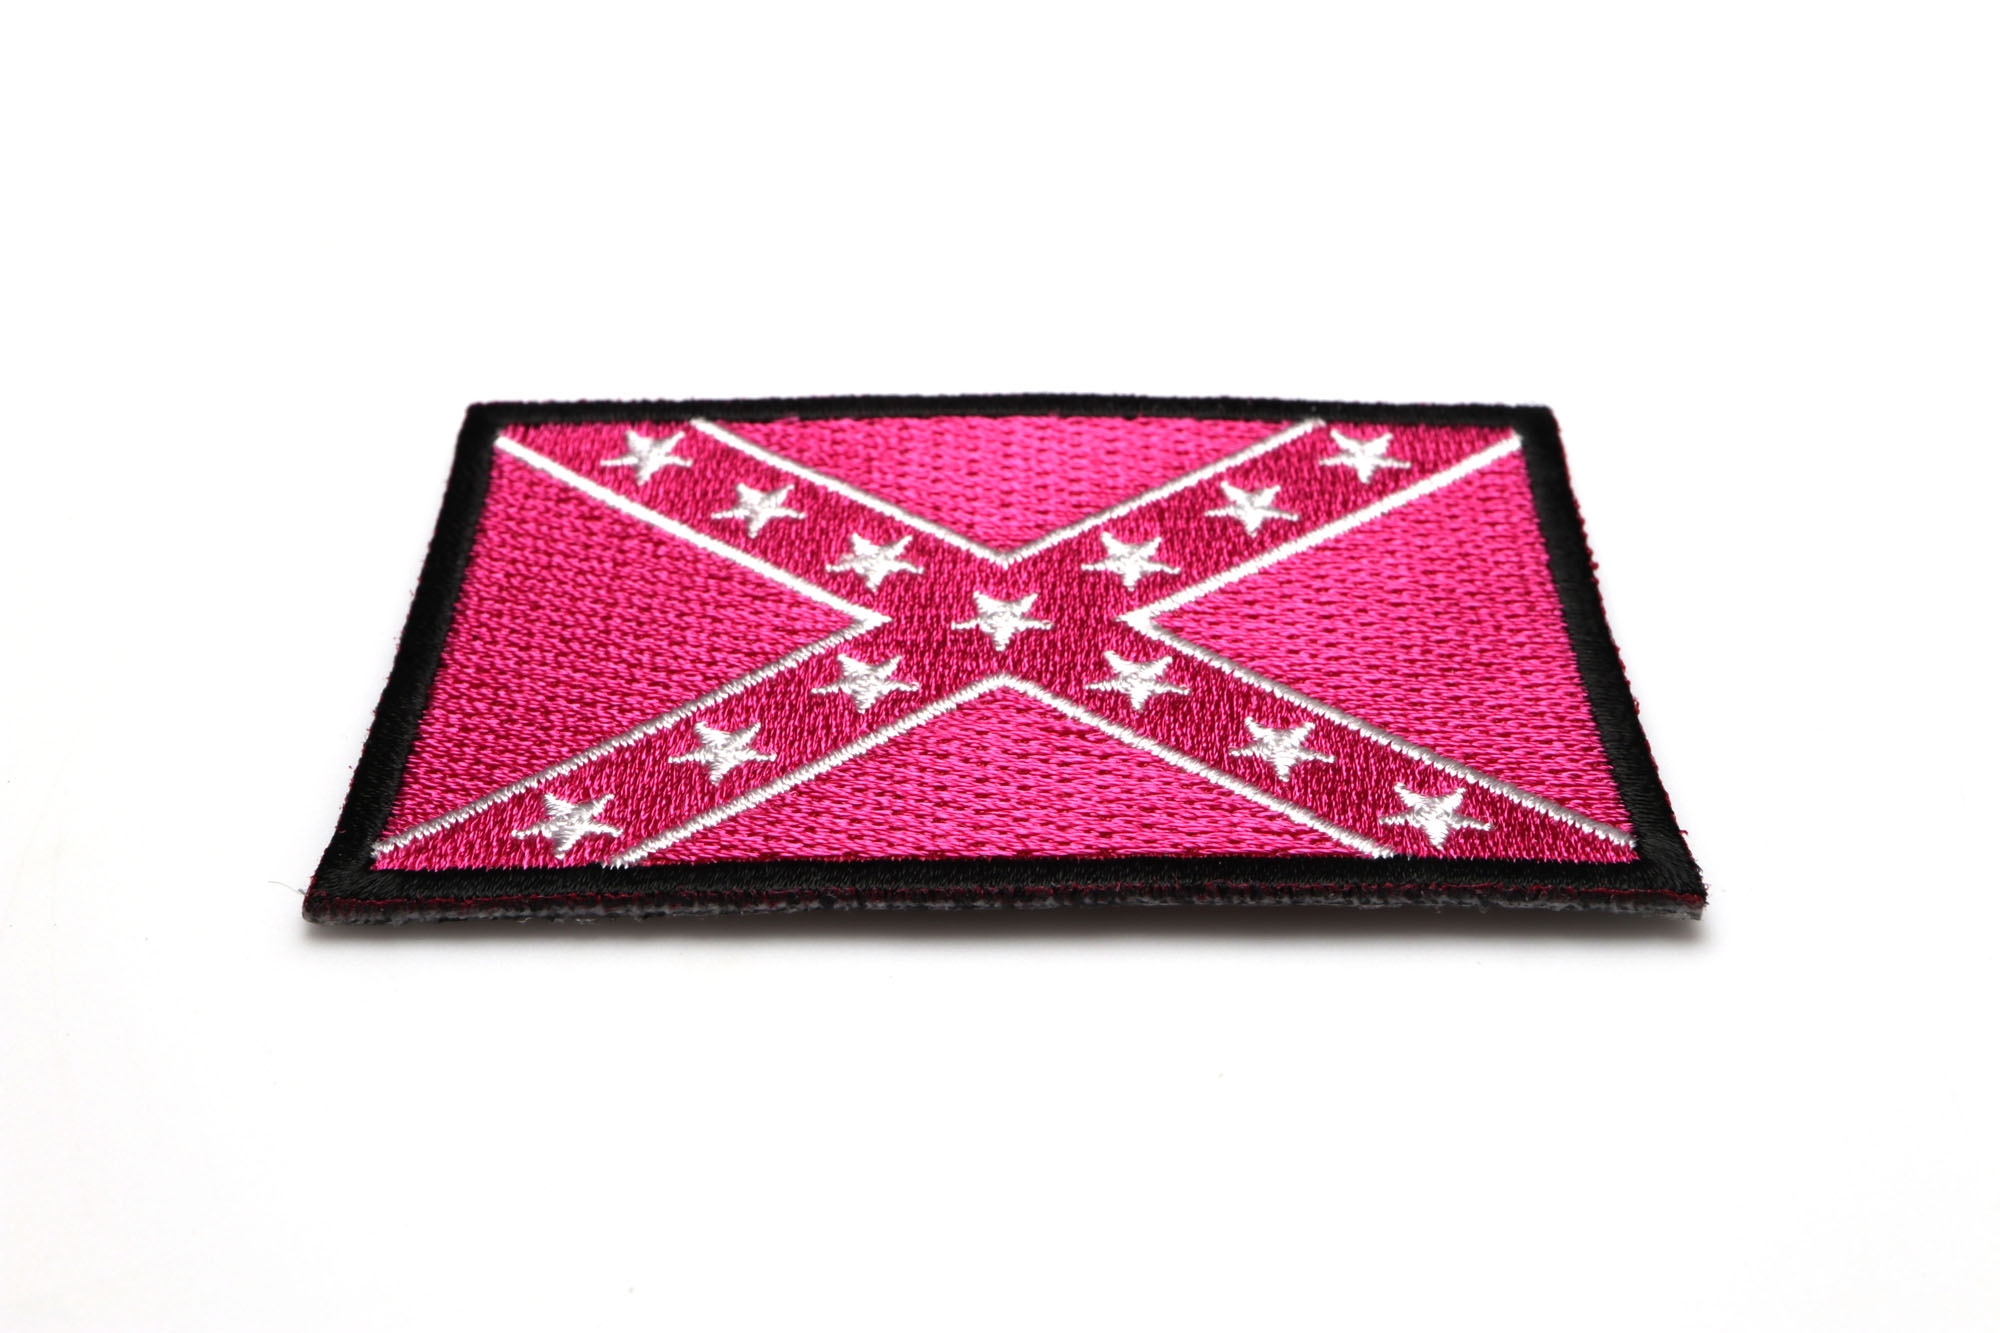 Pink Rebel Flag Patch and a few more